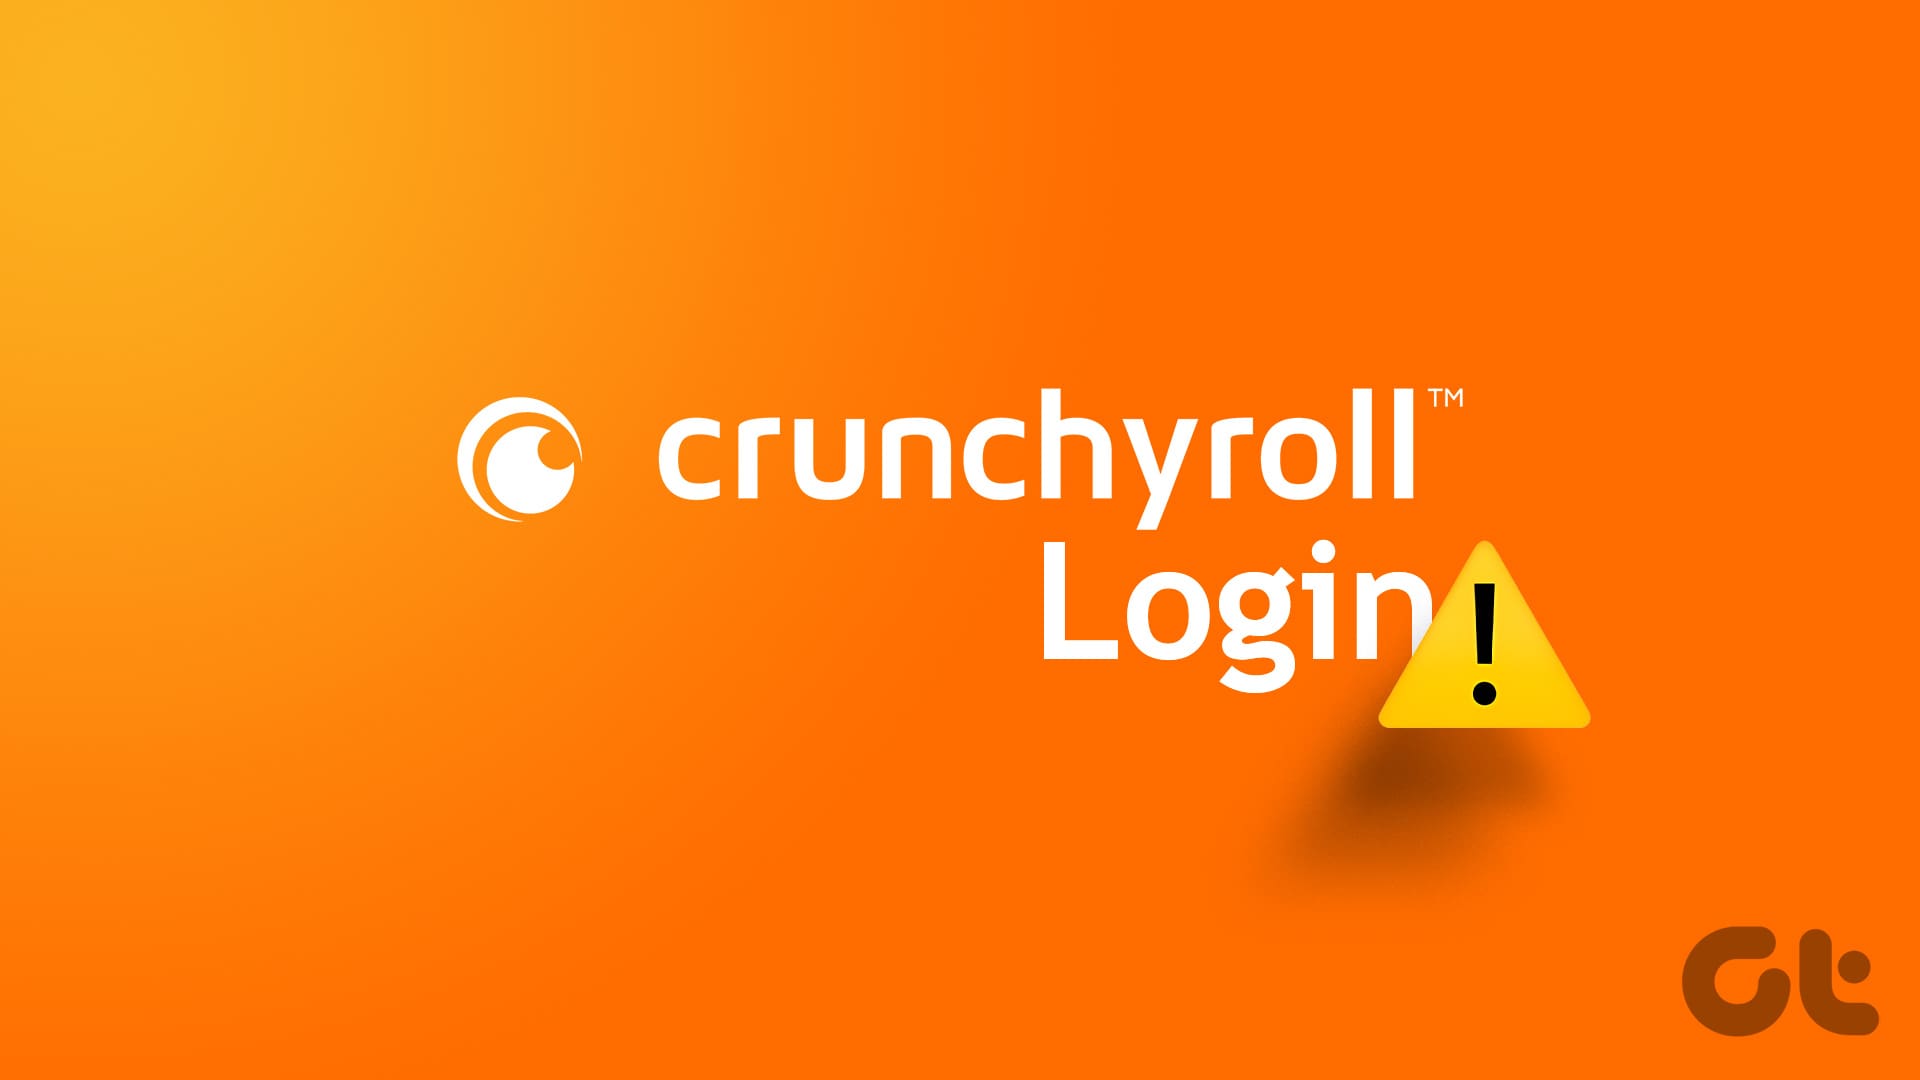 N_Best_Fixes_for_Cant_Login_to_Crunchyroll